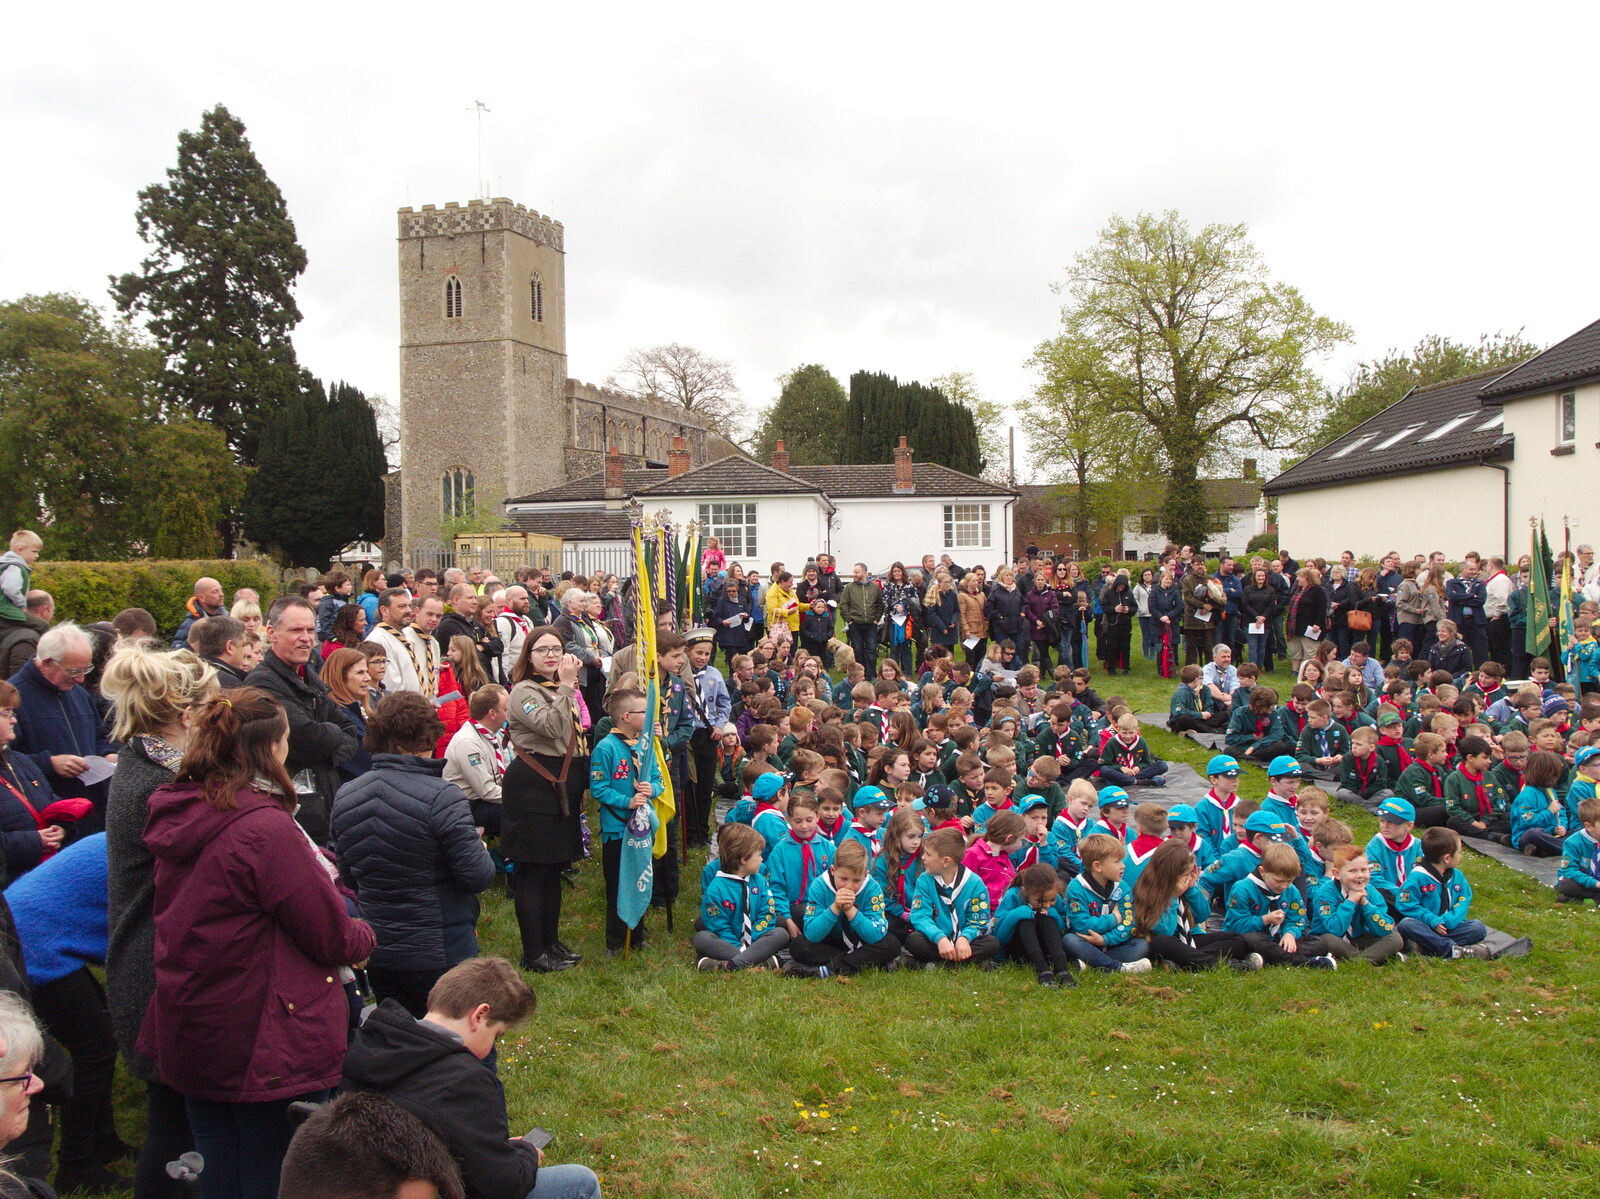 The massed crowds behind the church in Dickleburgh from A St. George's Day Parade, Dickleburgh, Norfolk - 28th April 2019